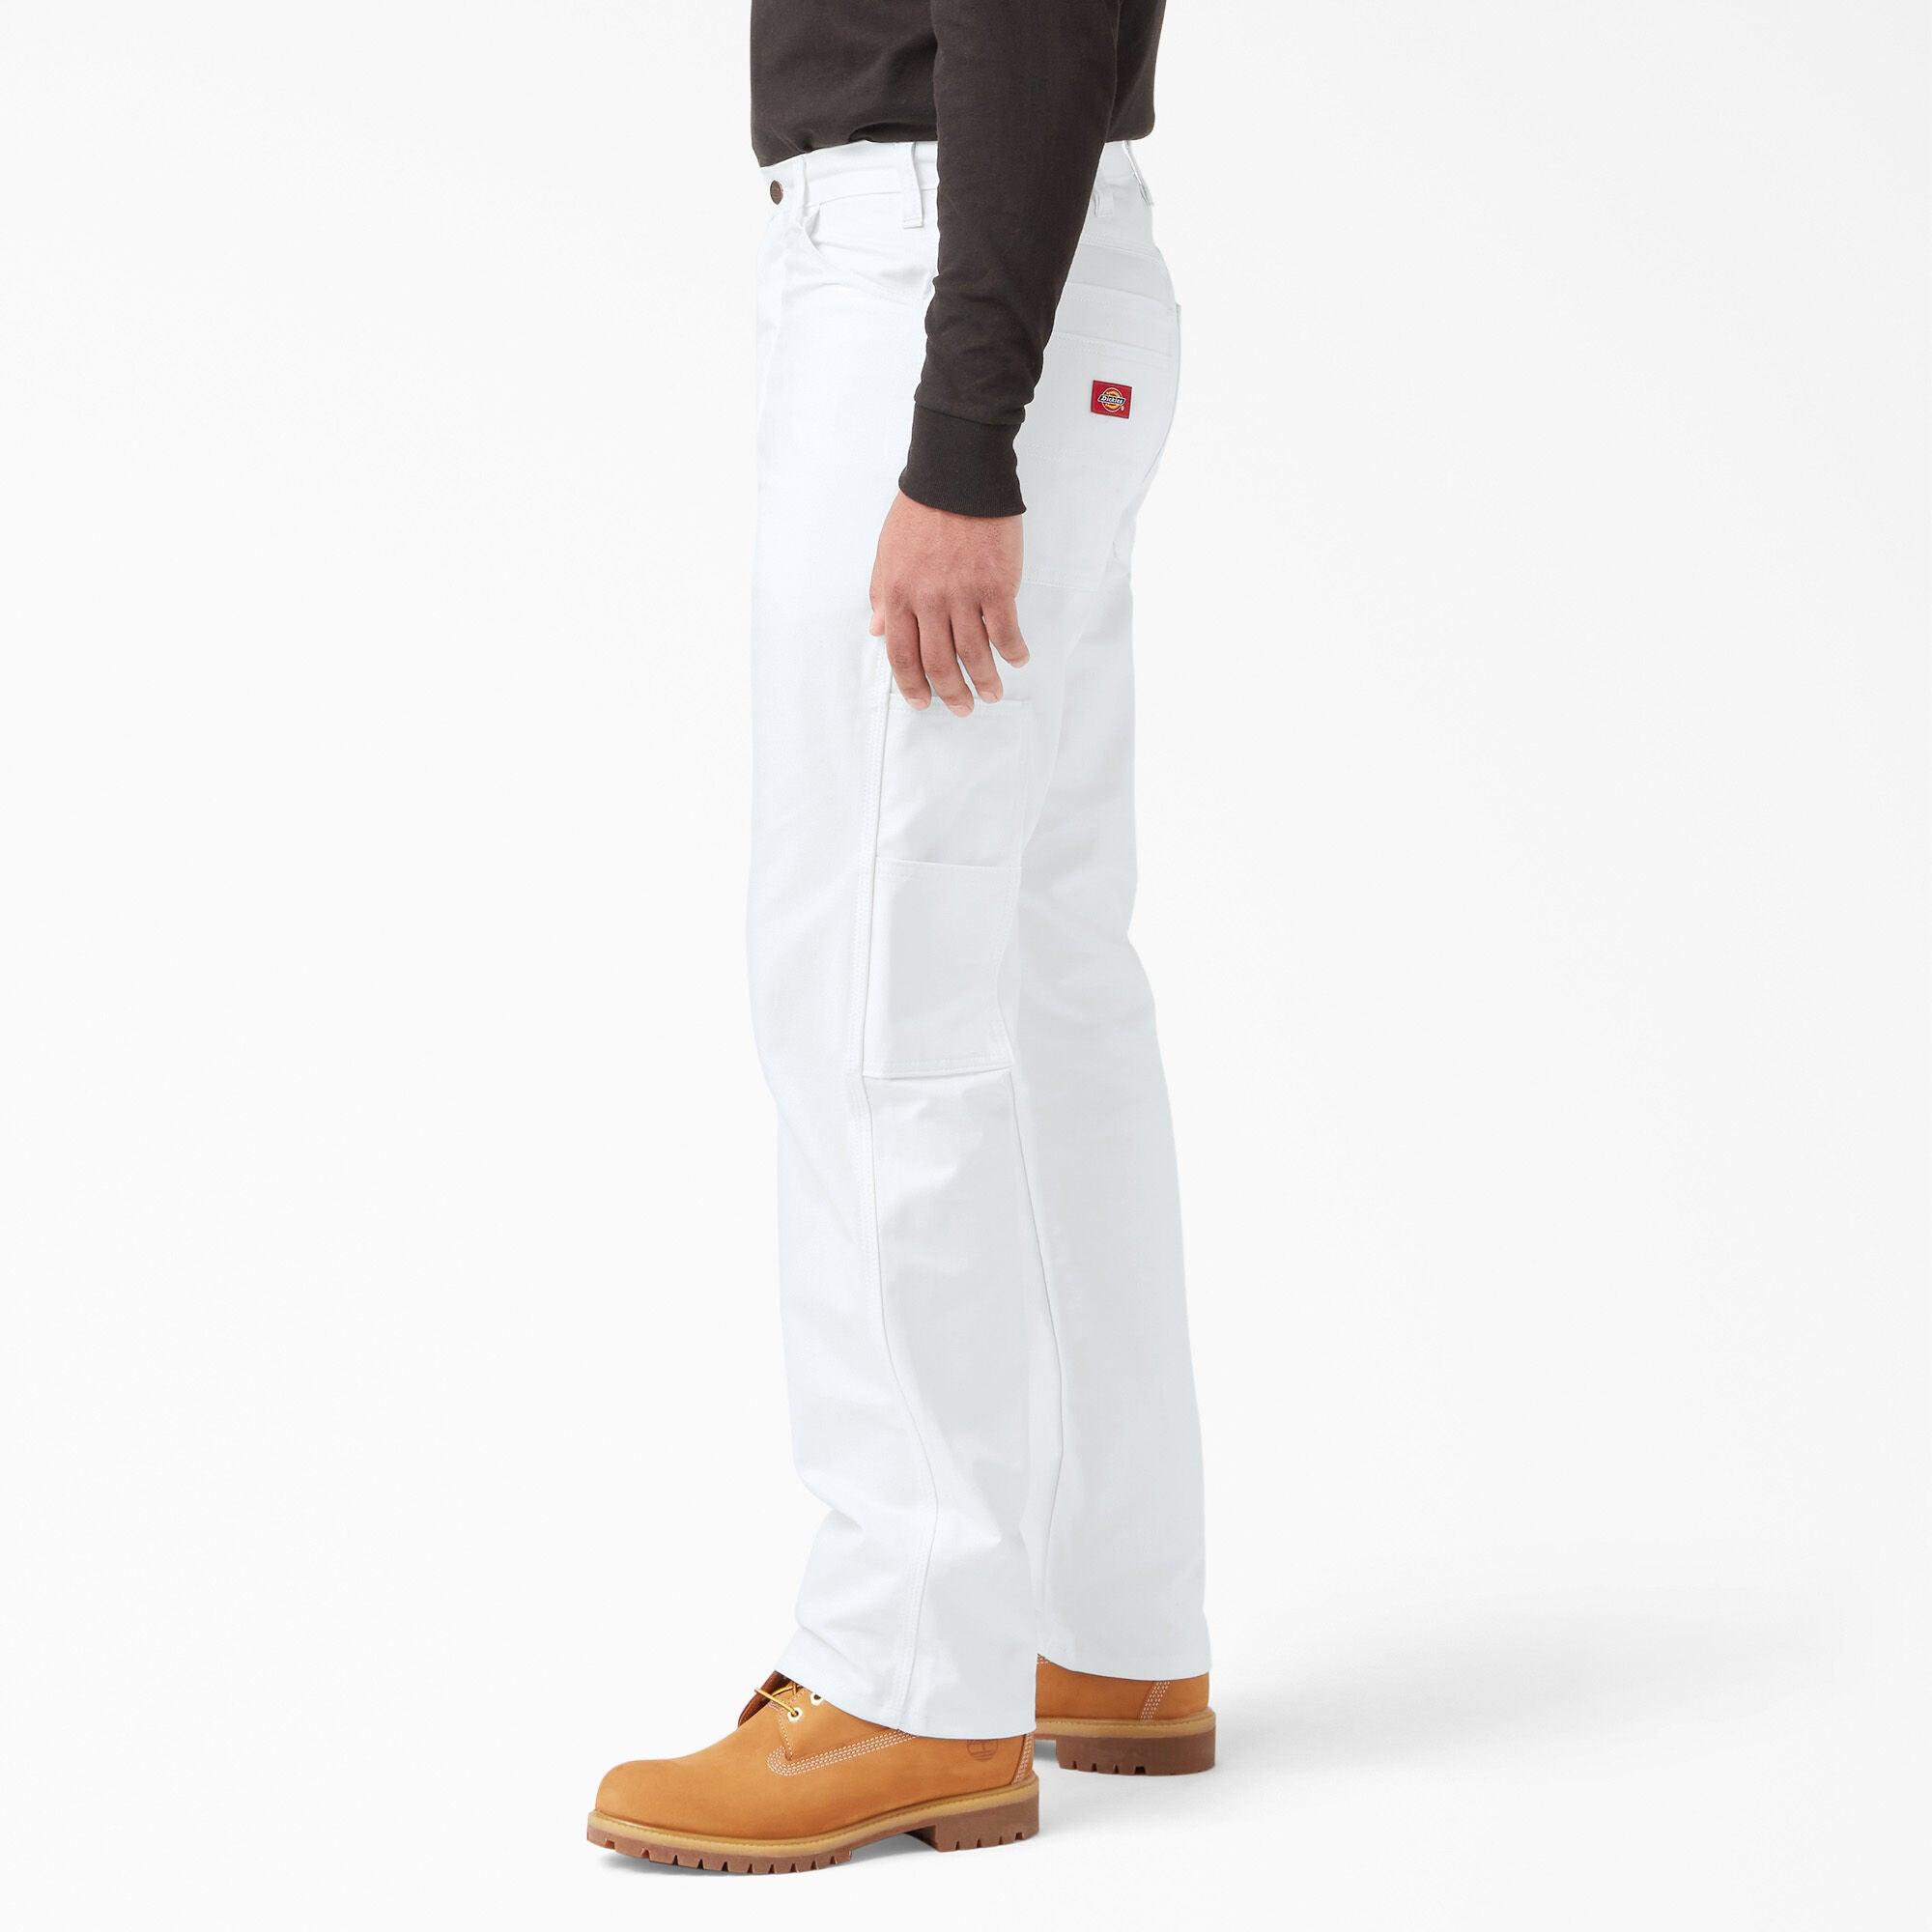 Relaxed Fit Straight Leg Painter's Pants, White - Purpose-Built / Home of the Trades